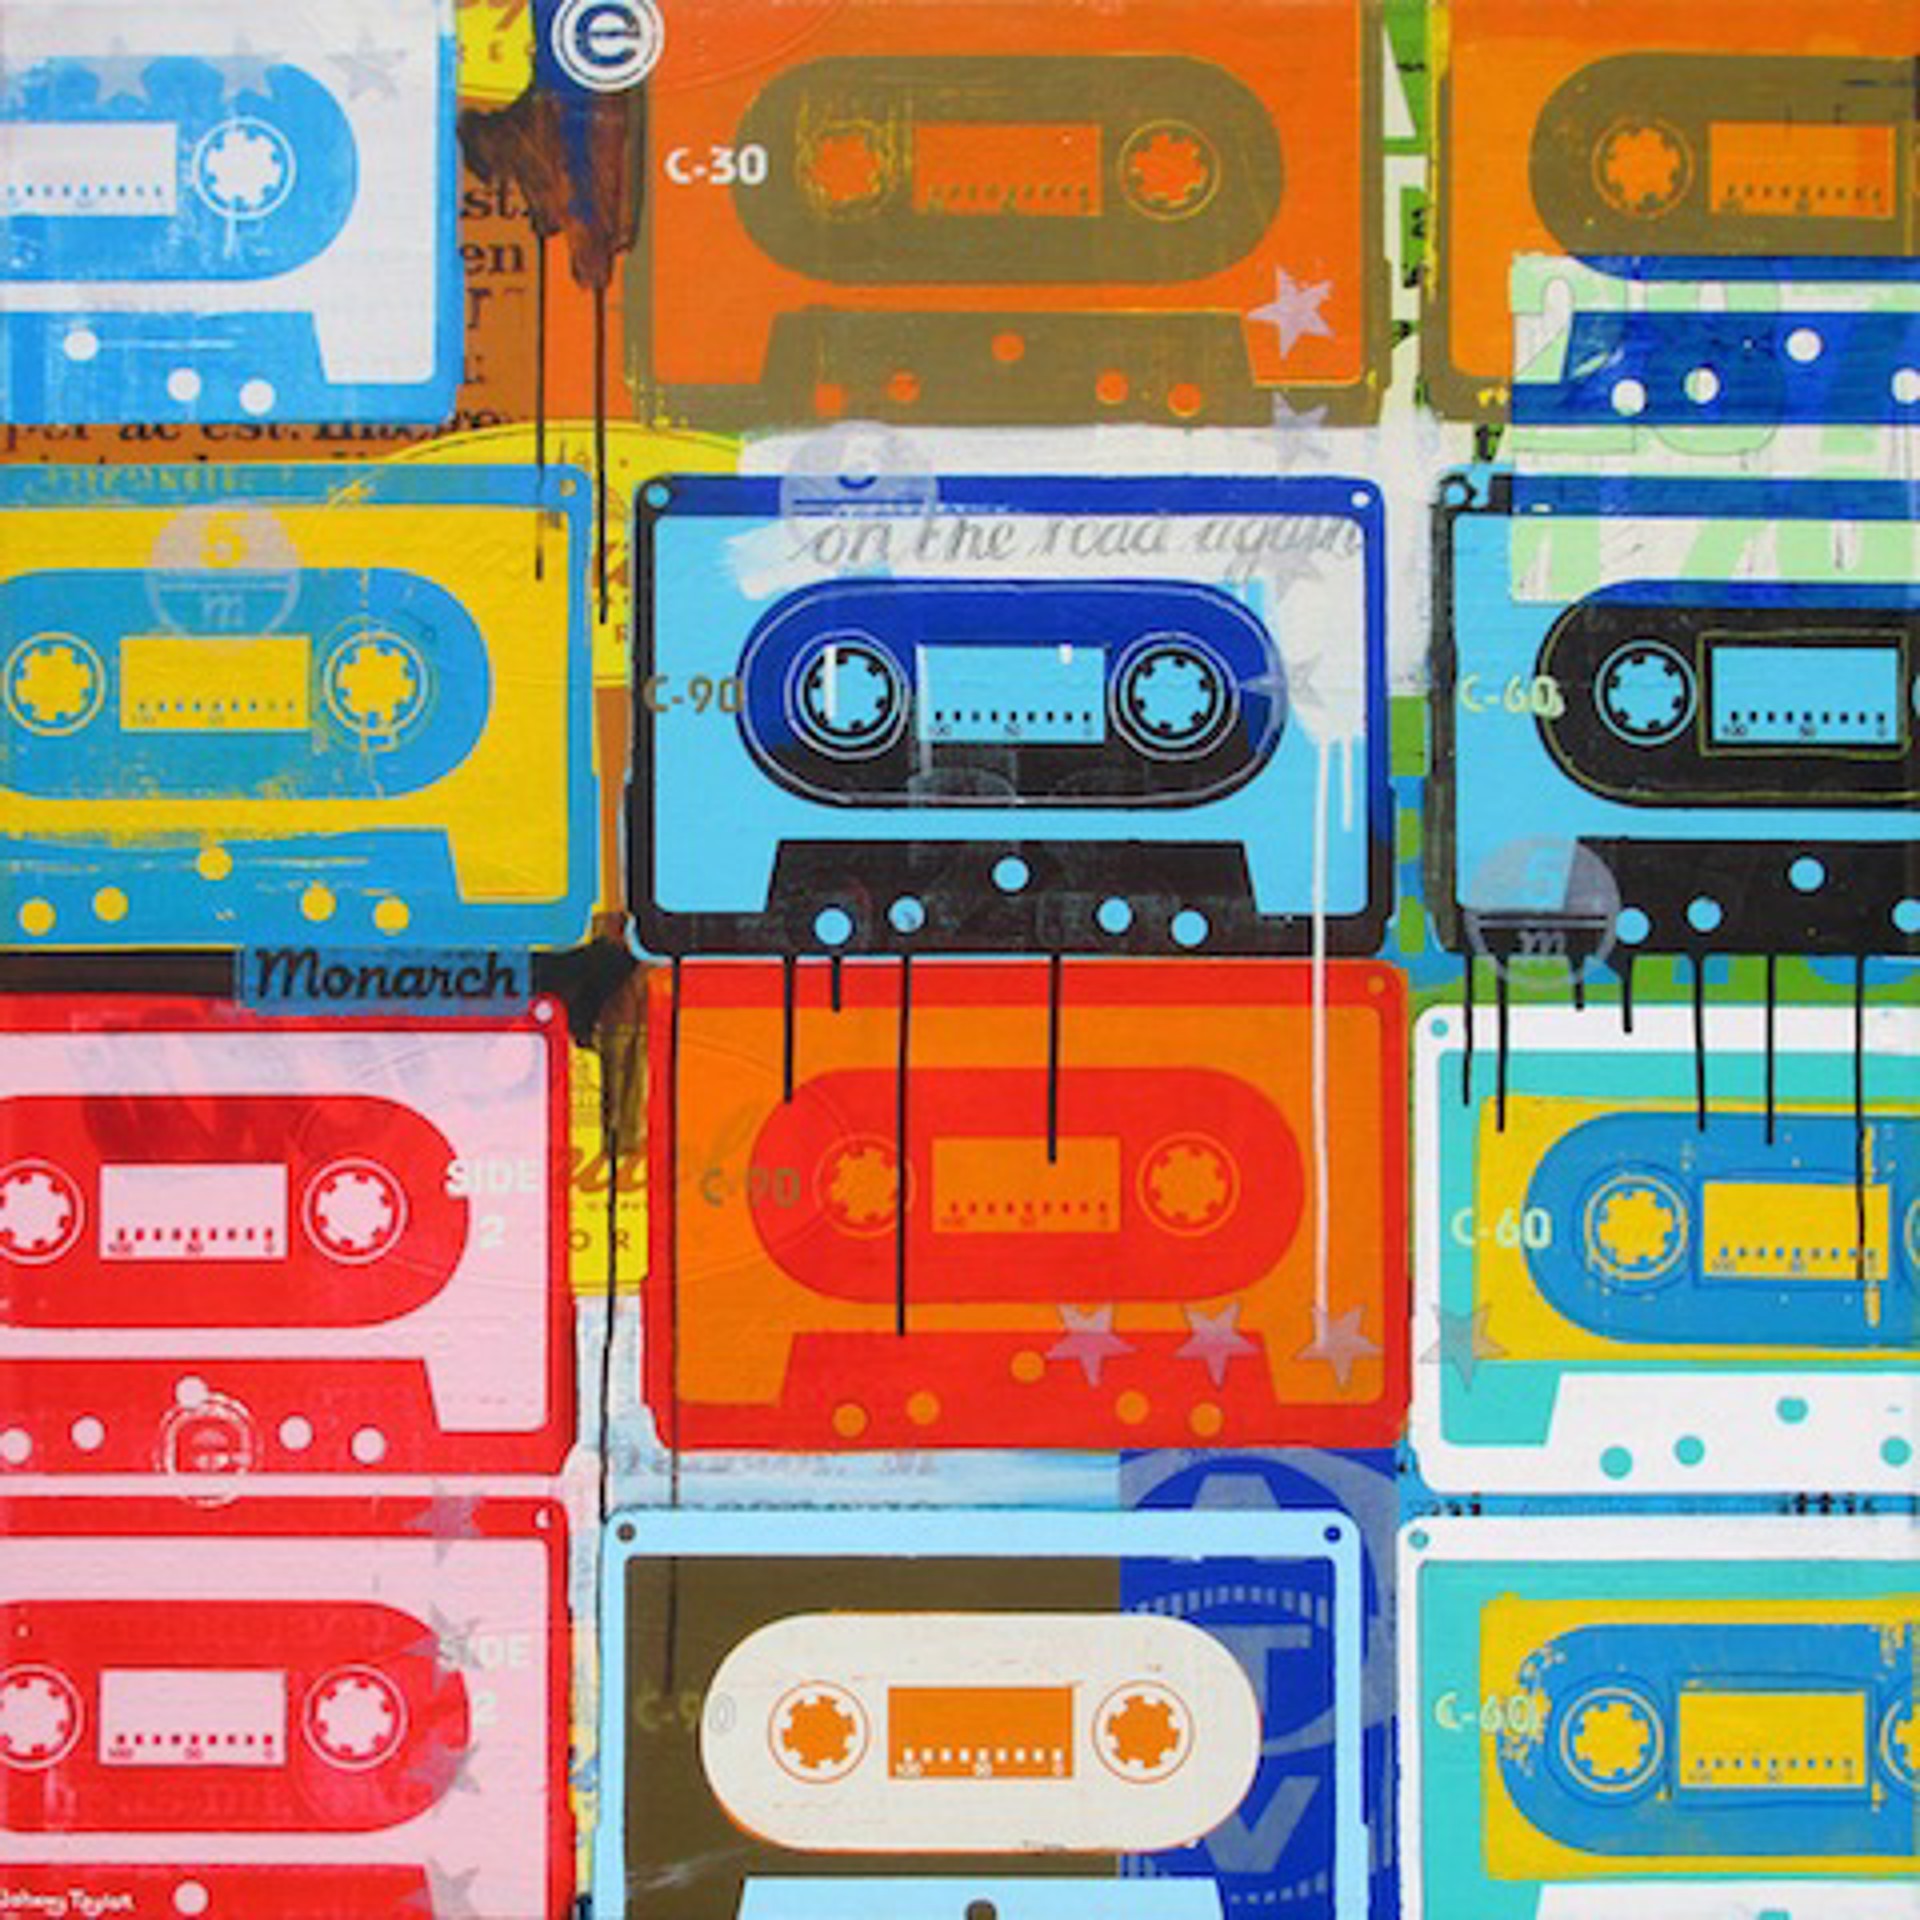 12 Cassettes by Johnny Taylor